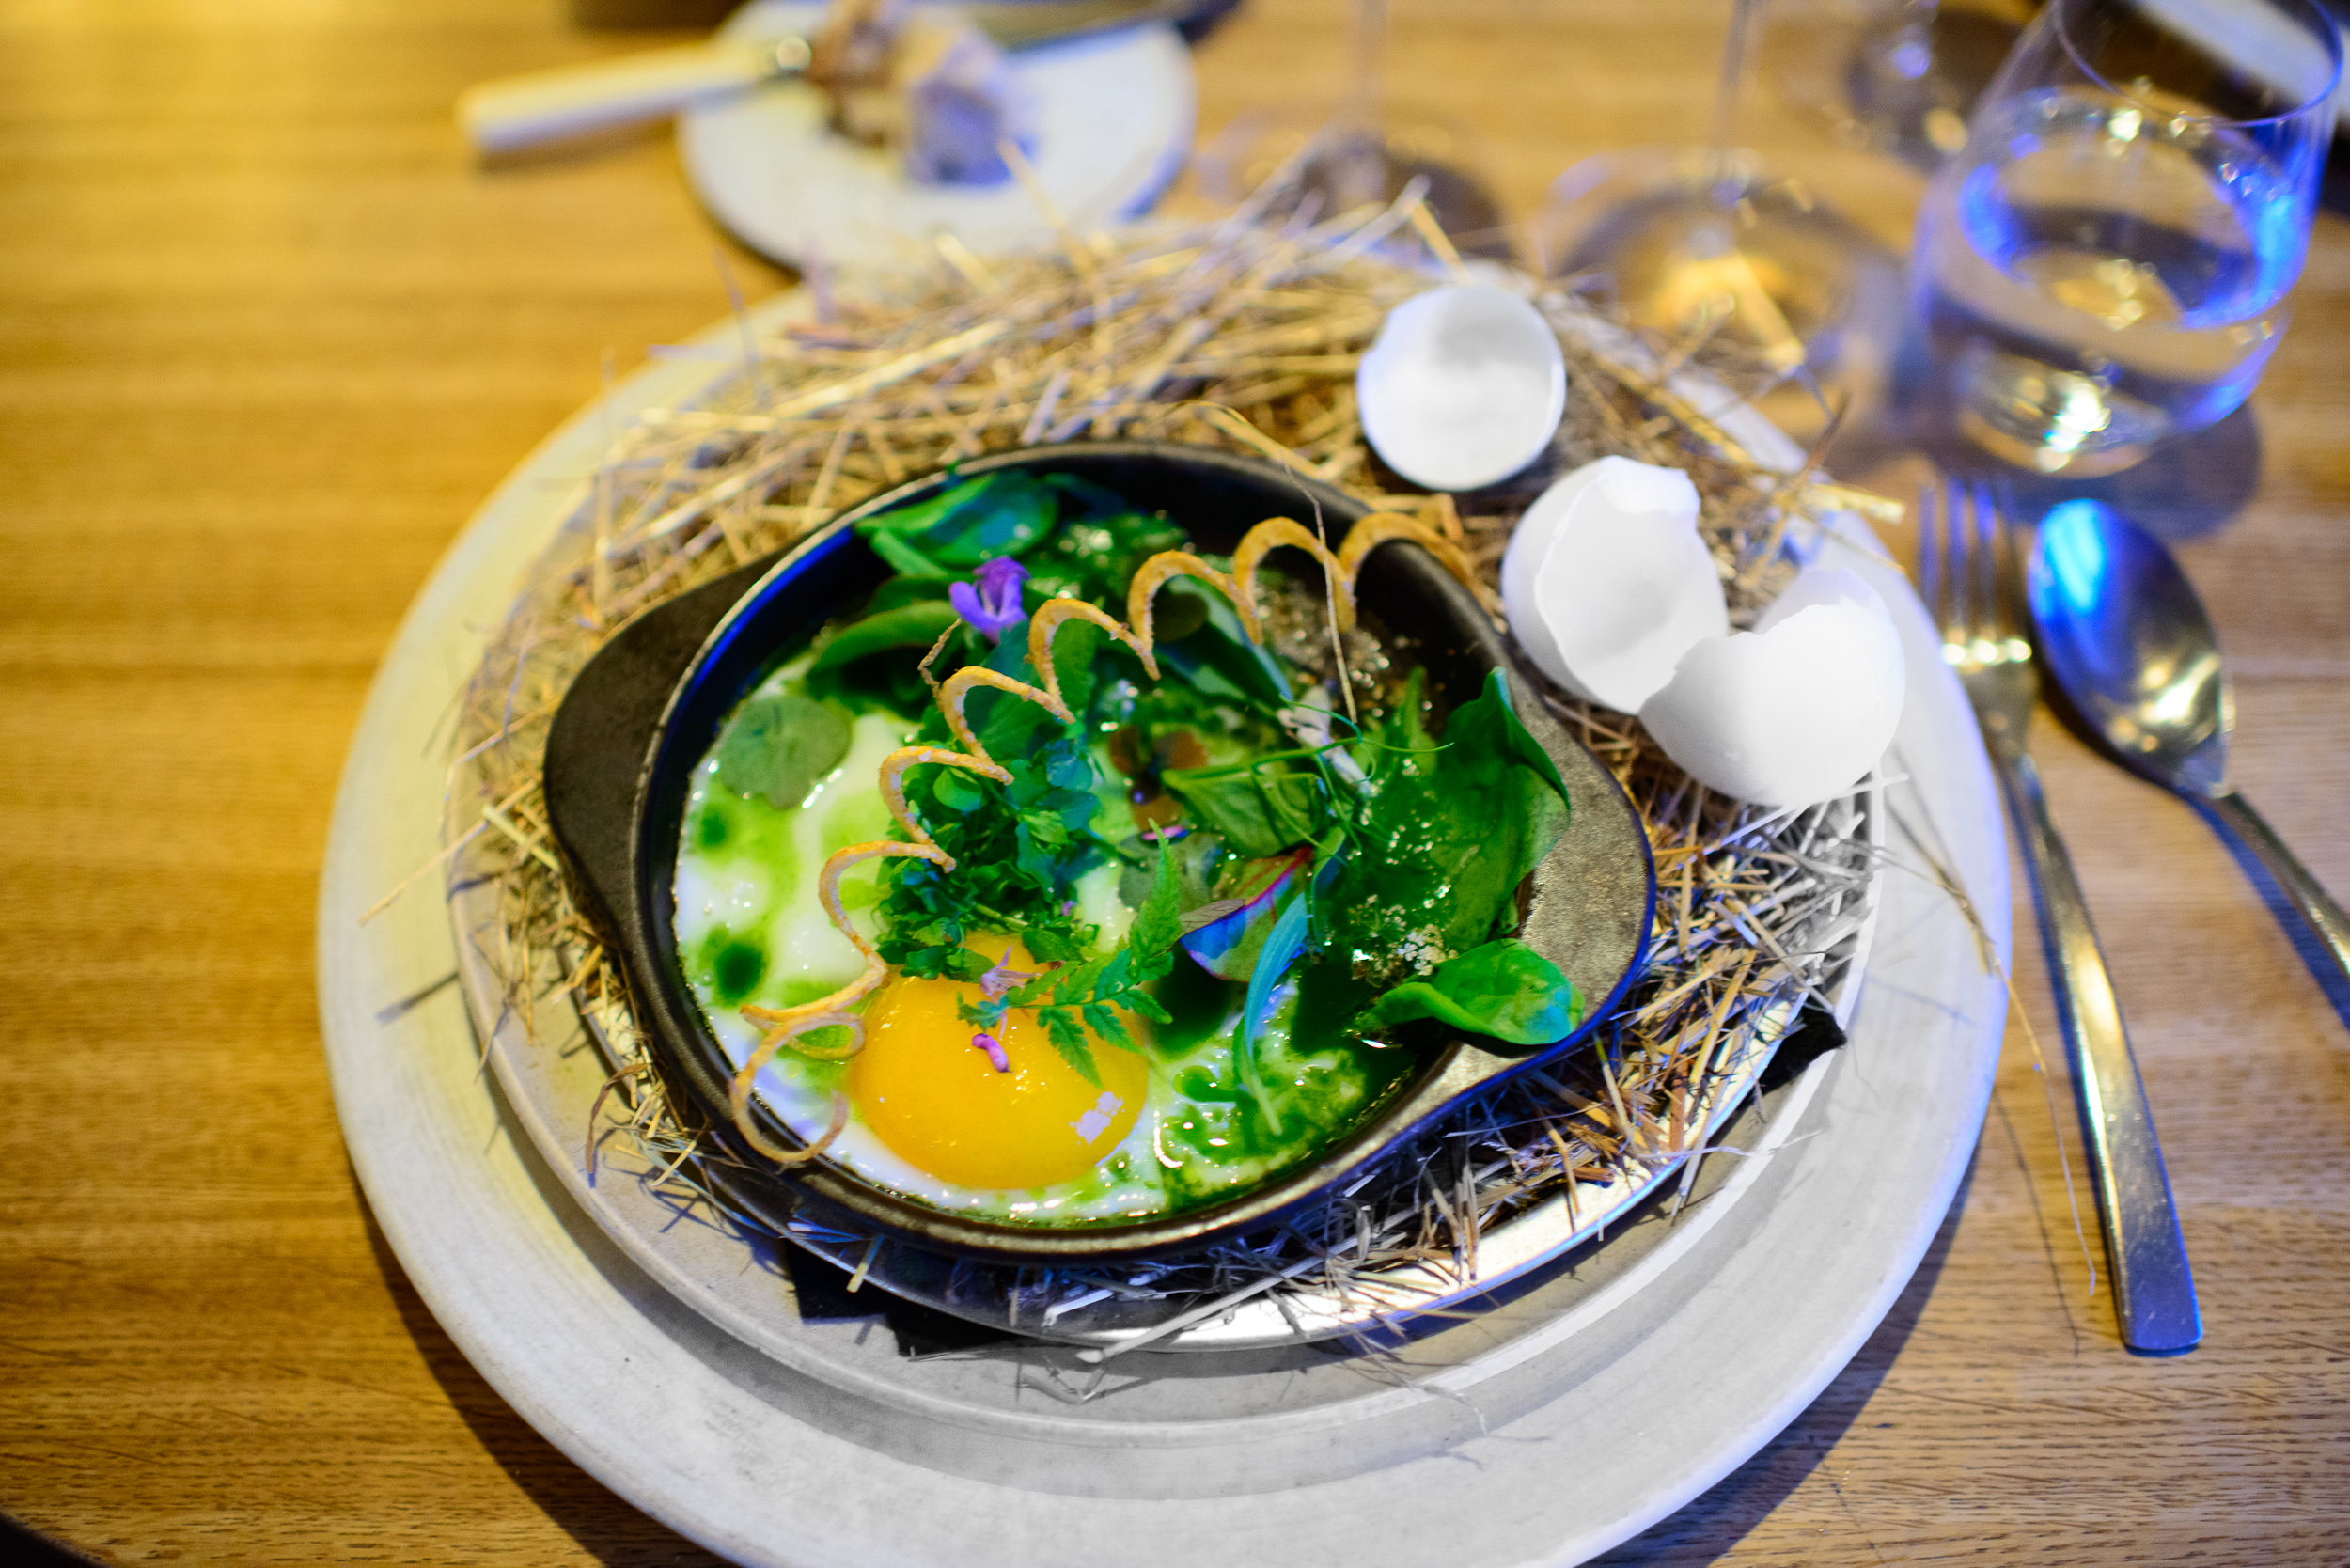 26th Course: Egg yolk and herbs